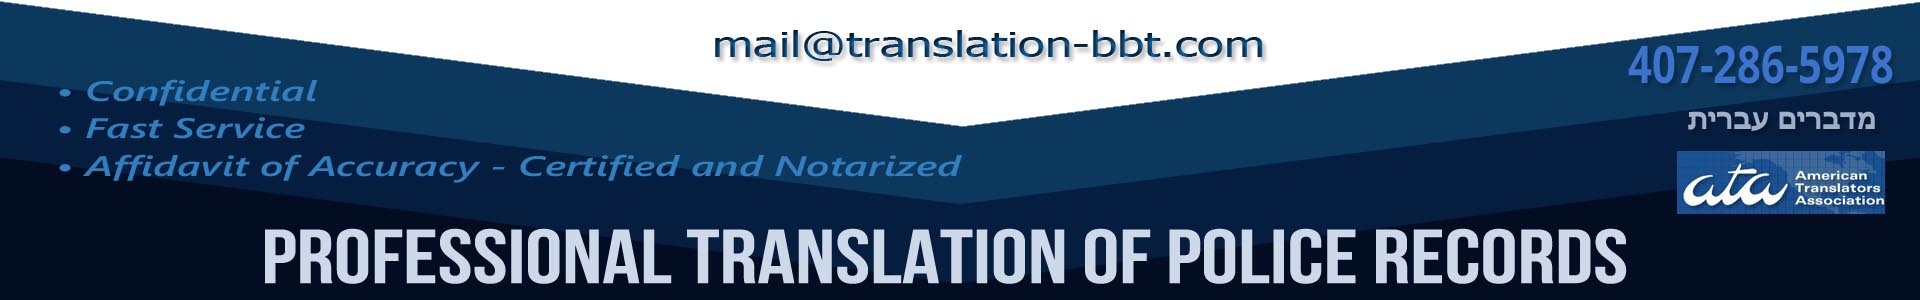 translation of police records, personal certified translation service, certified and notarized translation of police records, hebrew to english translation, spanish to english translation, ata